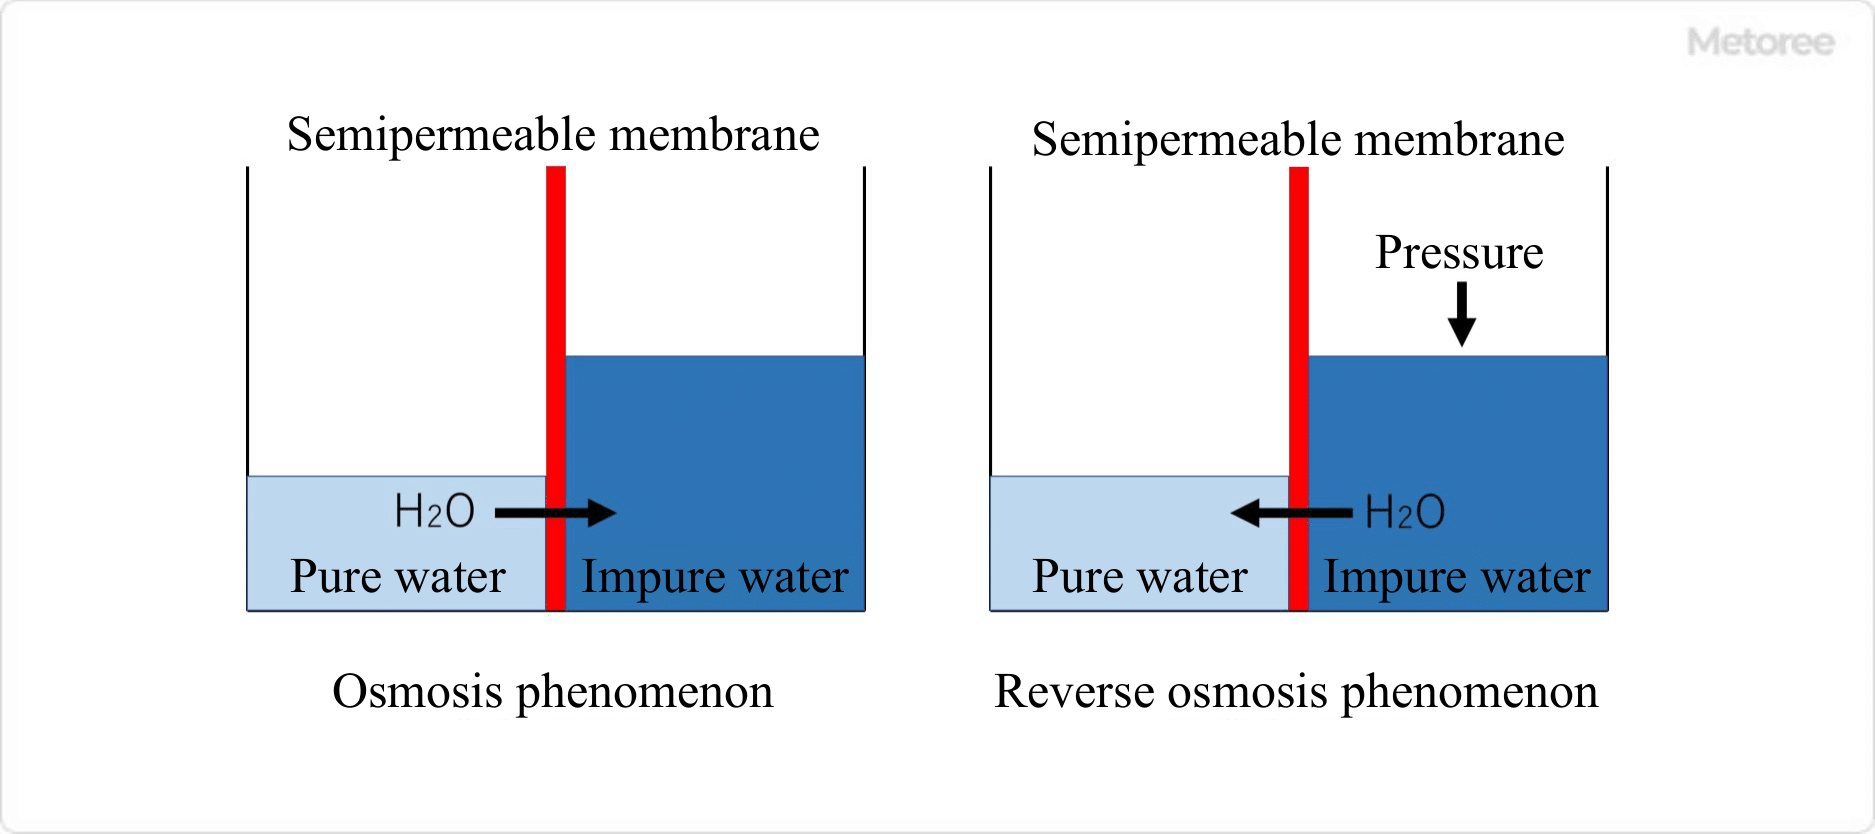 Reverse Osmosis (RO) - Definition, Working Principle, Process, Experiment,  Advantages, Disadvantages of Reverse Osmosis.